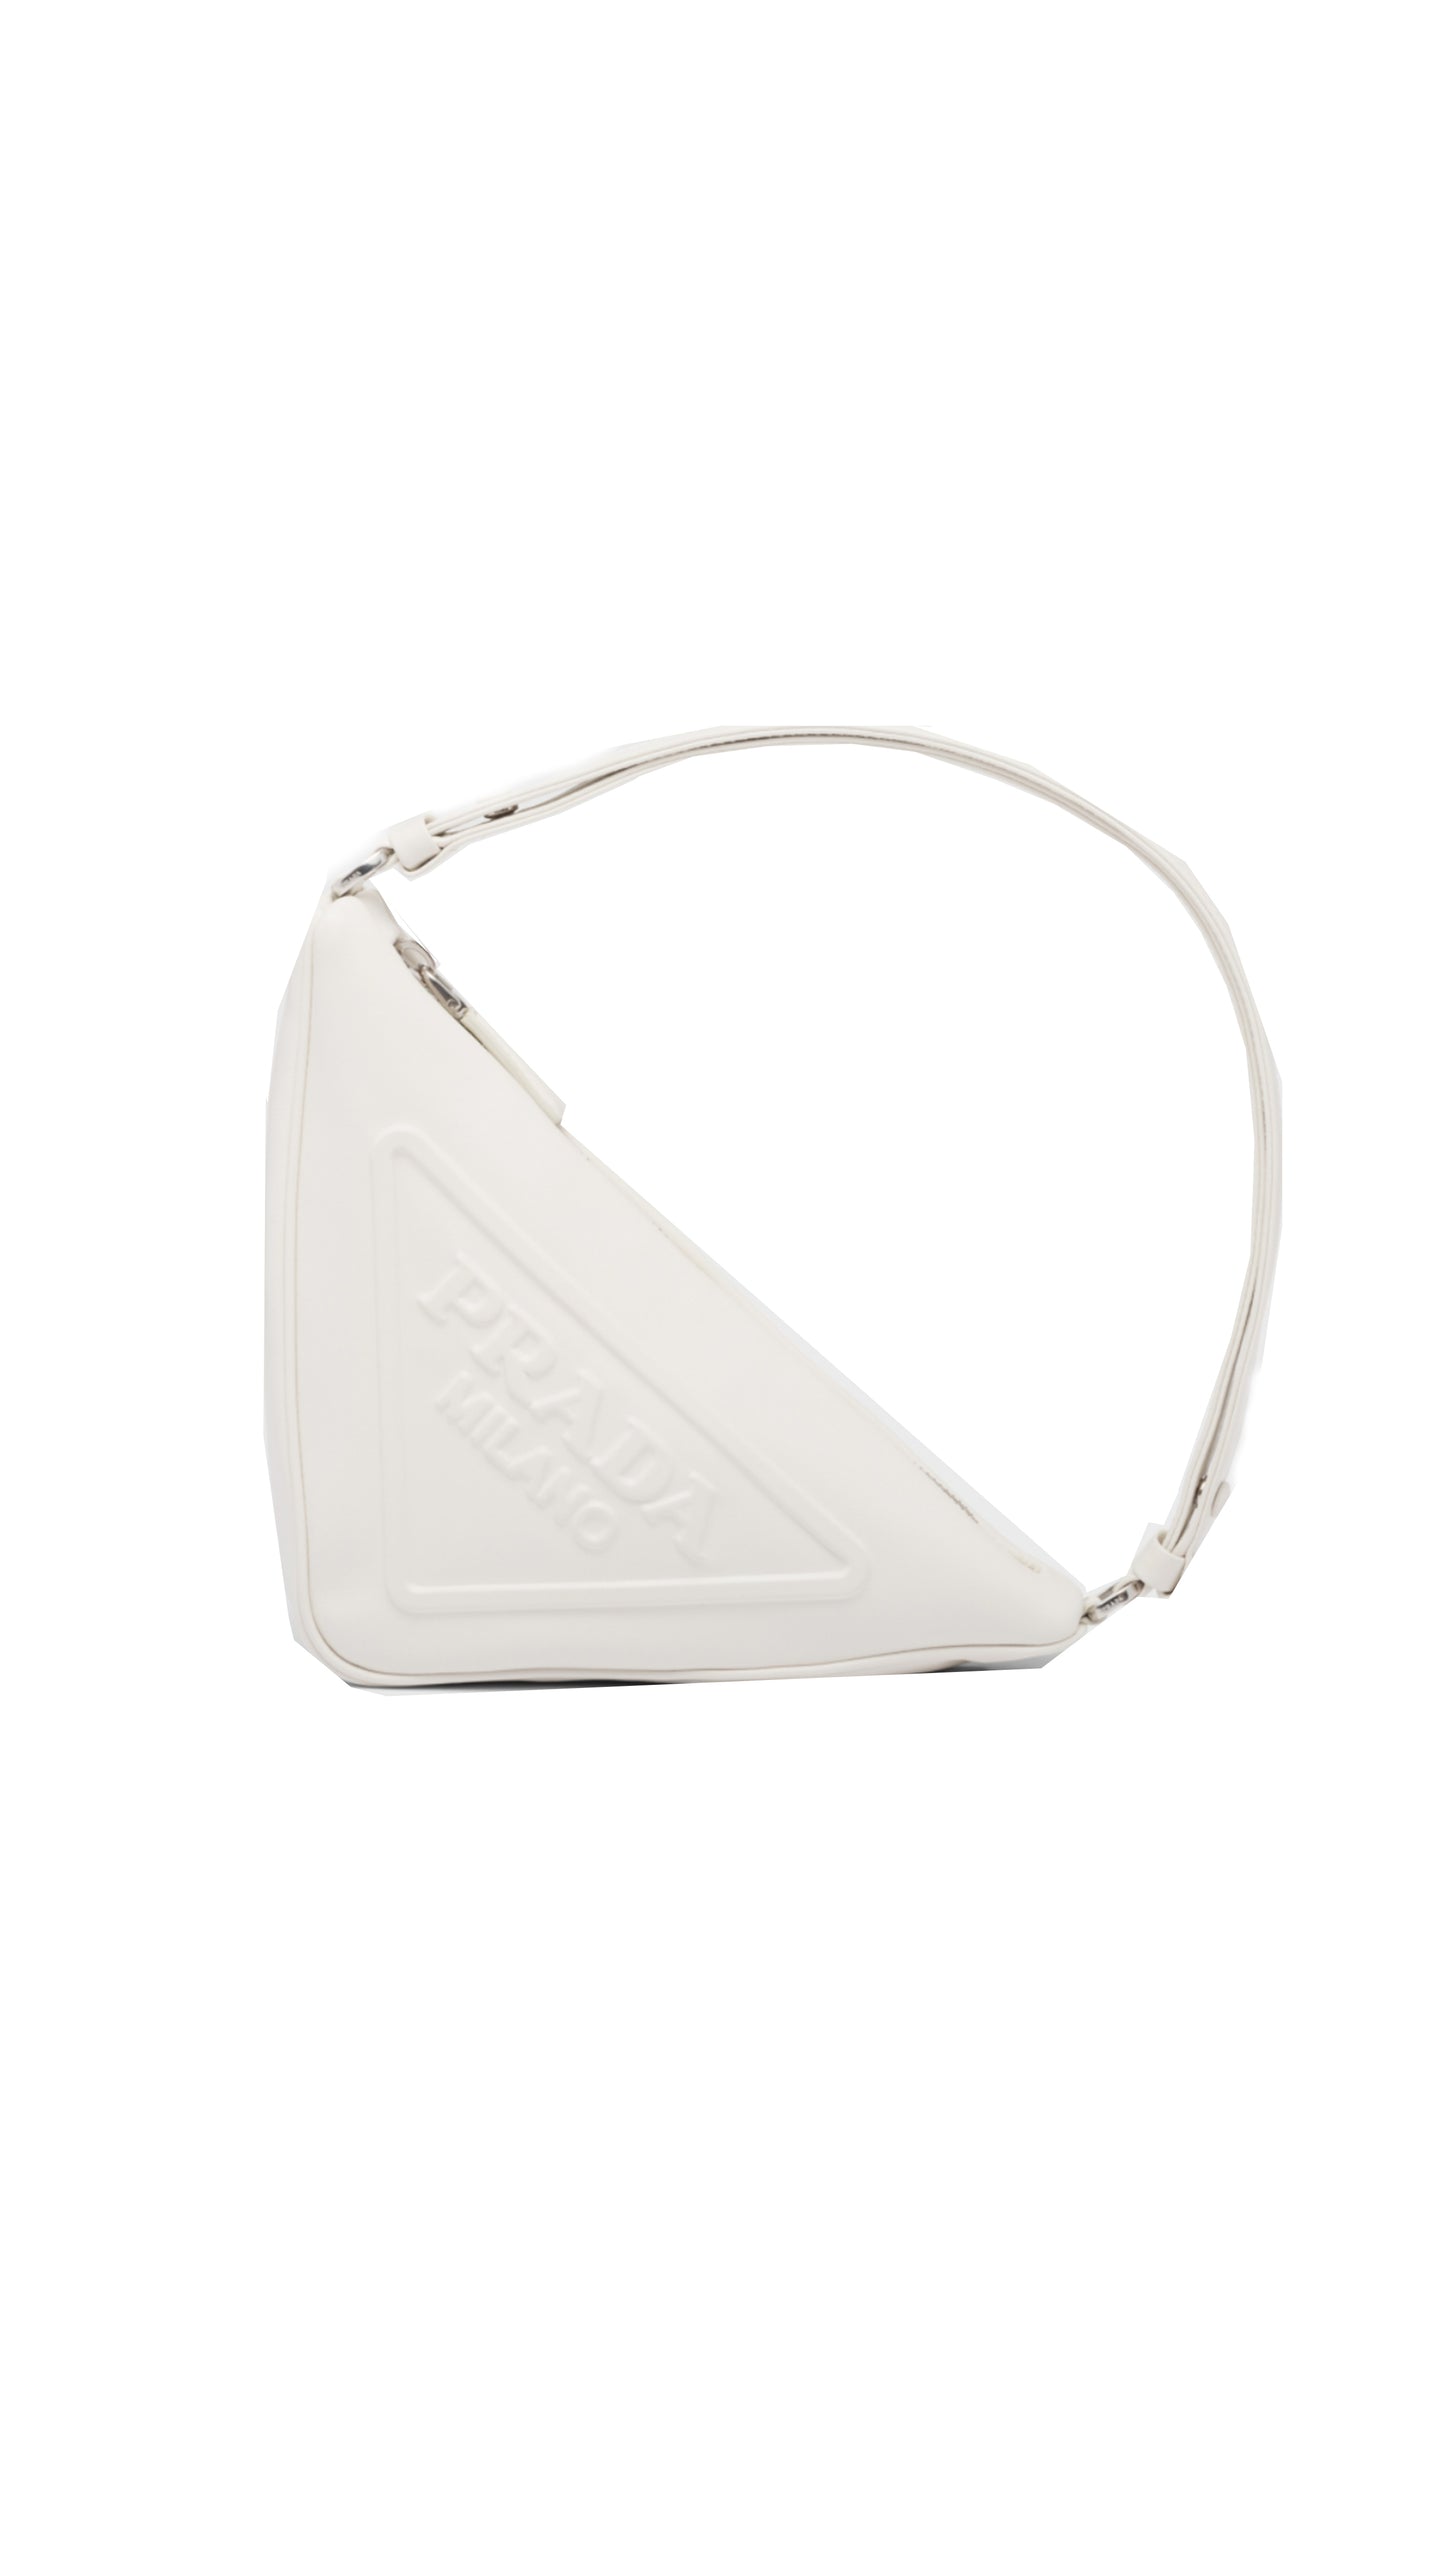 Triangle Leather Pouch Bag - White